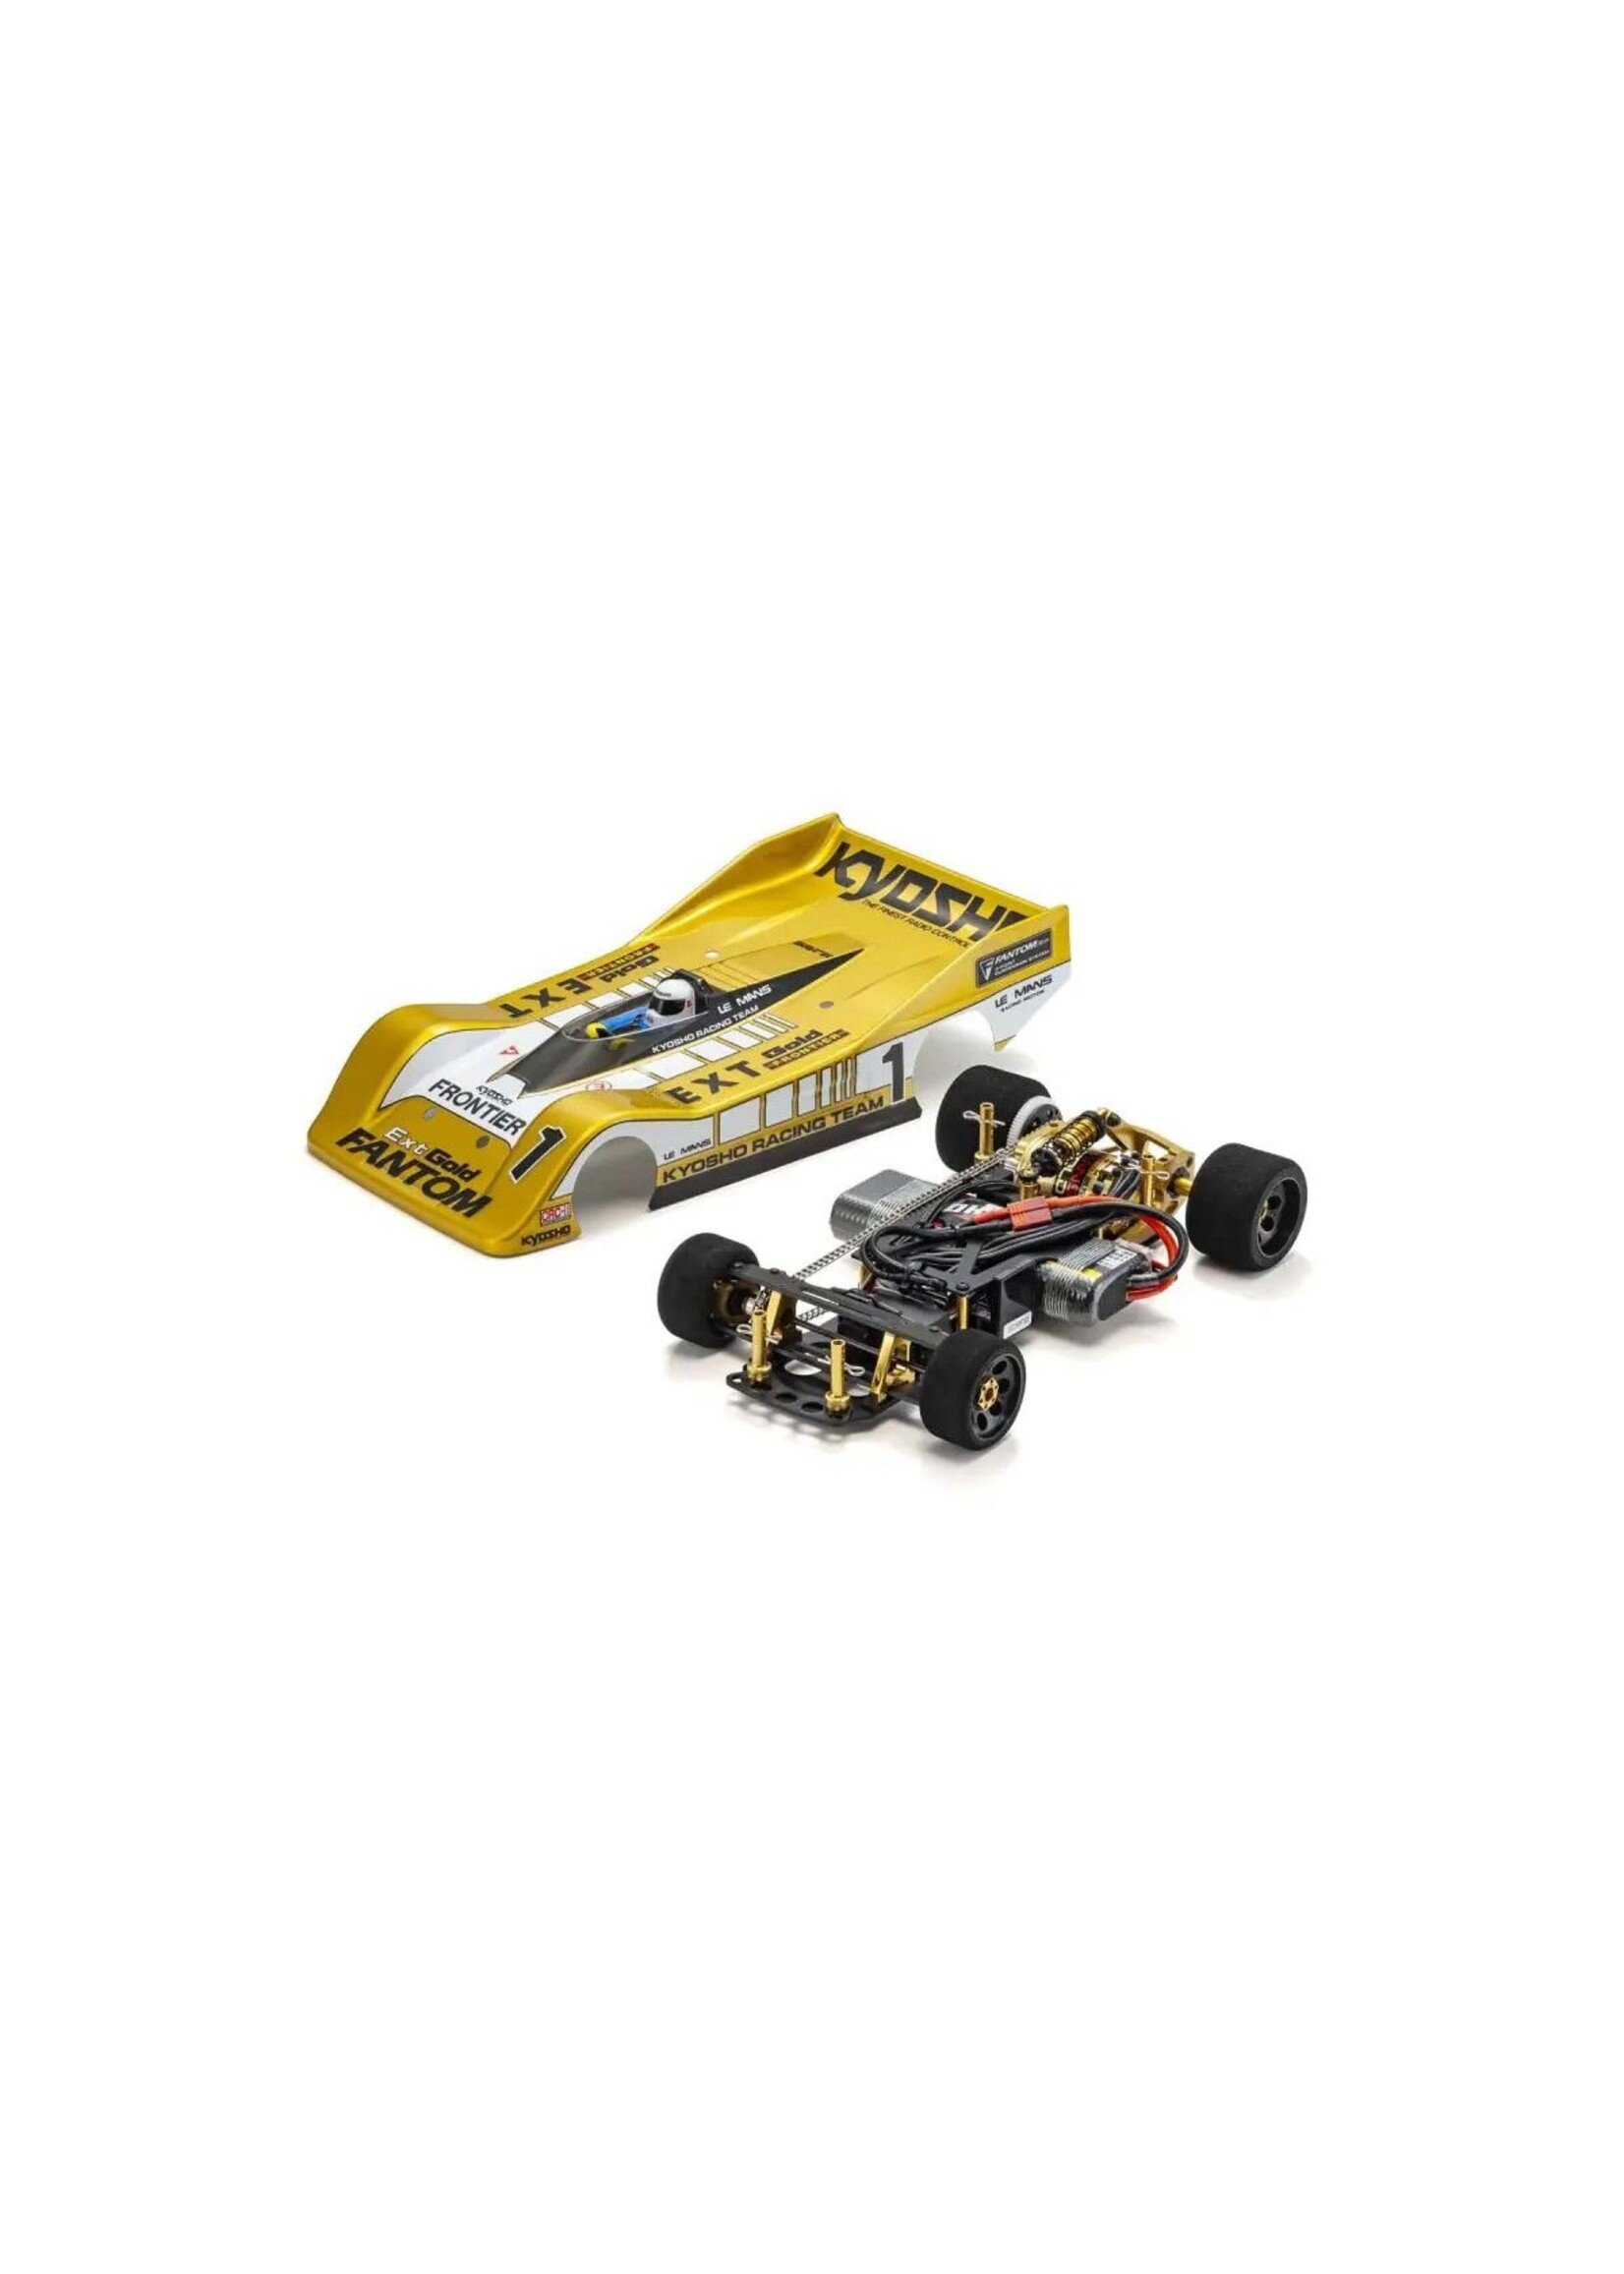 Kyosho 30644 - Fantom EP 4WD EXT Gold 60th Anniversary Edition